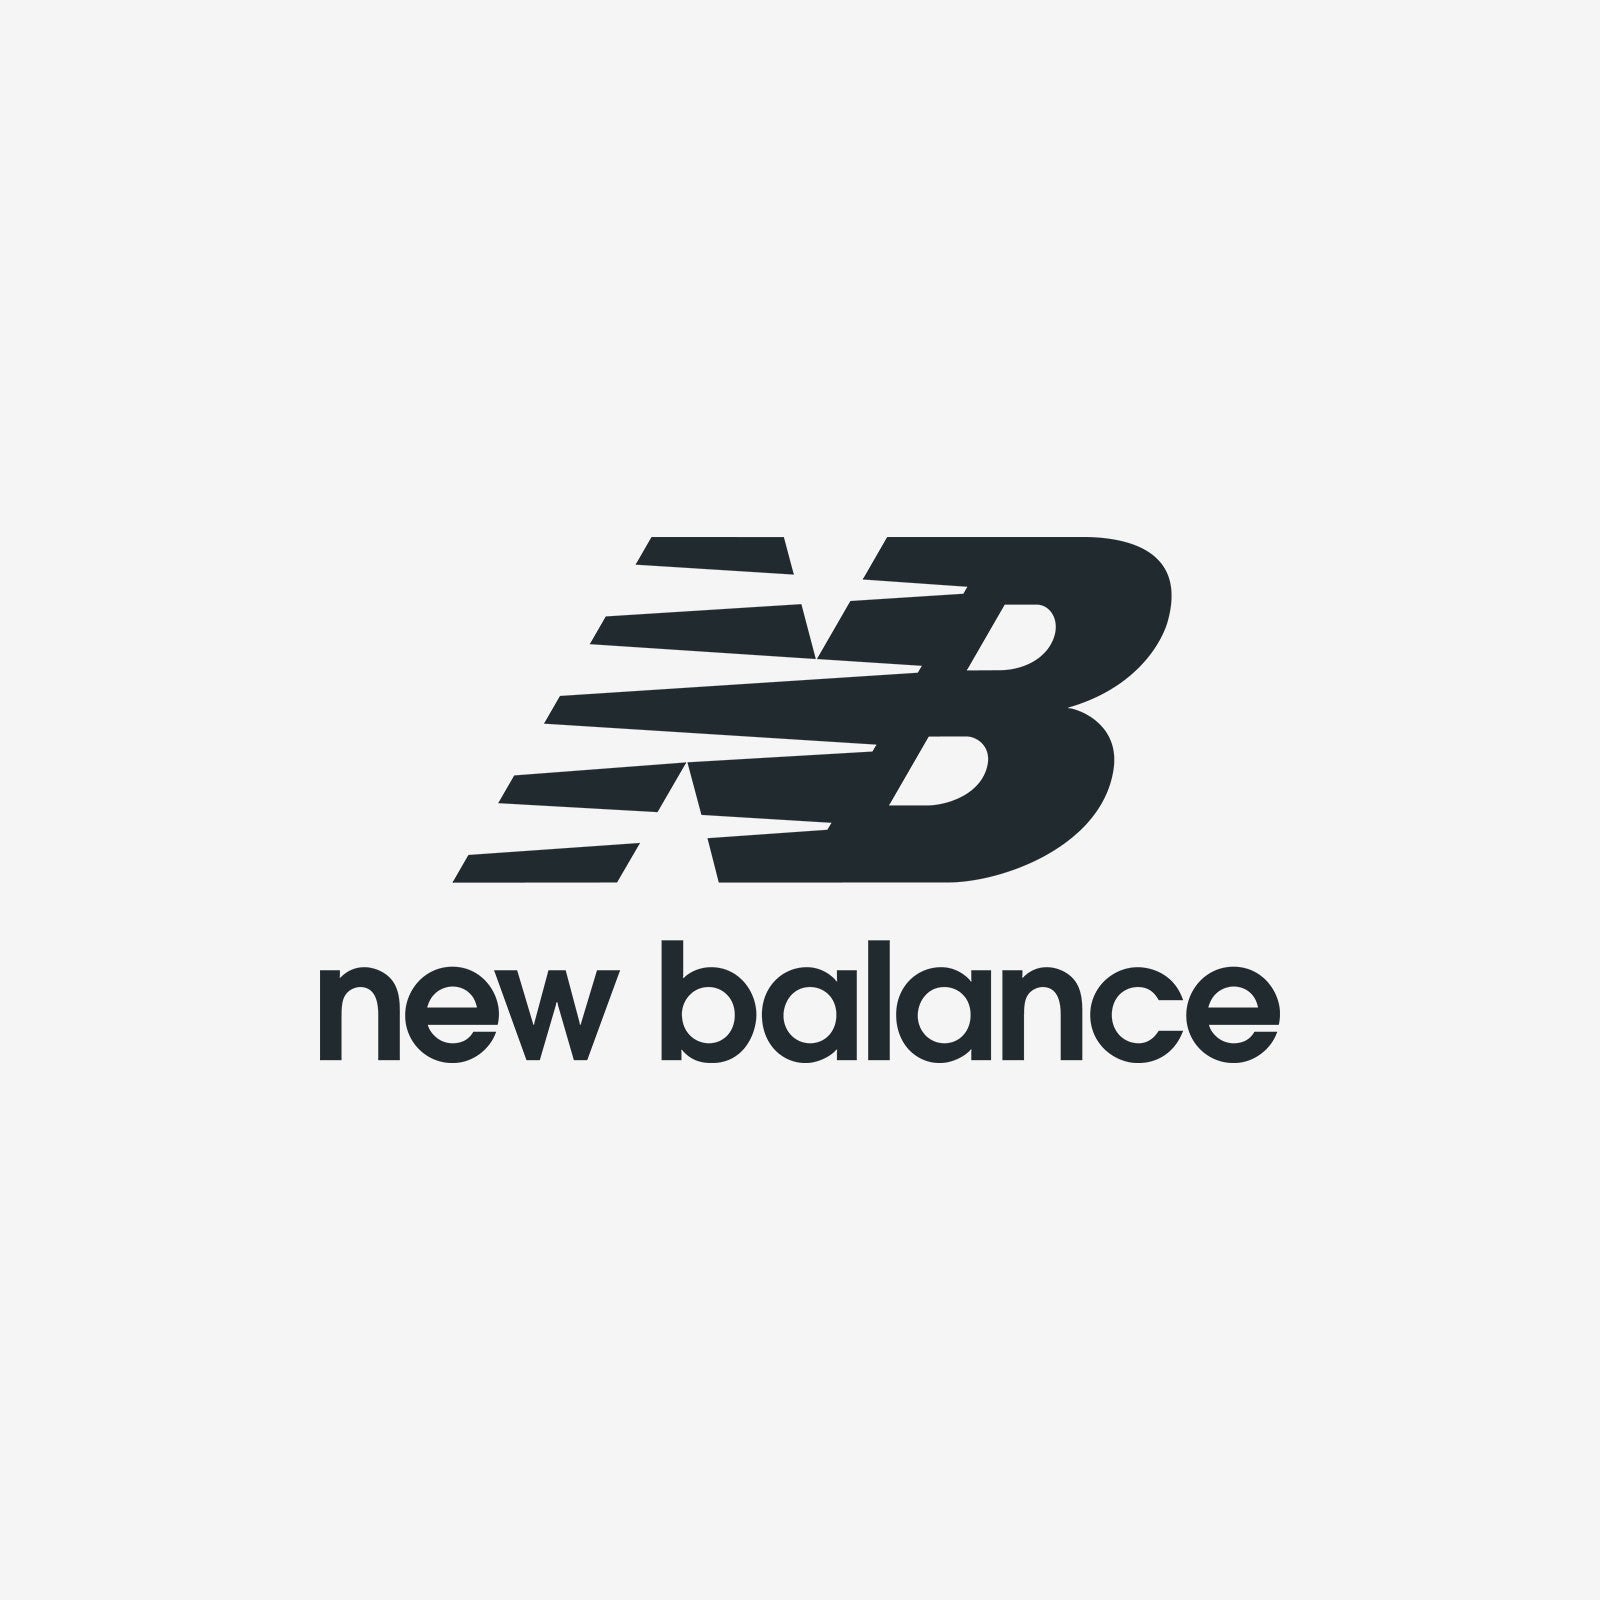 New Balance Shoes, Athletics, Running Shoes, Sneakers | Peltz Shoes